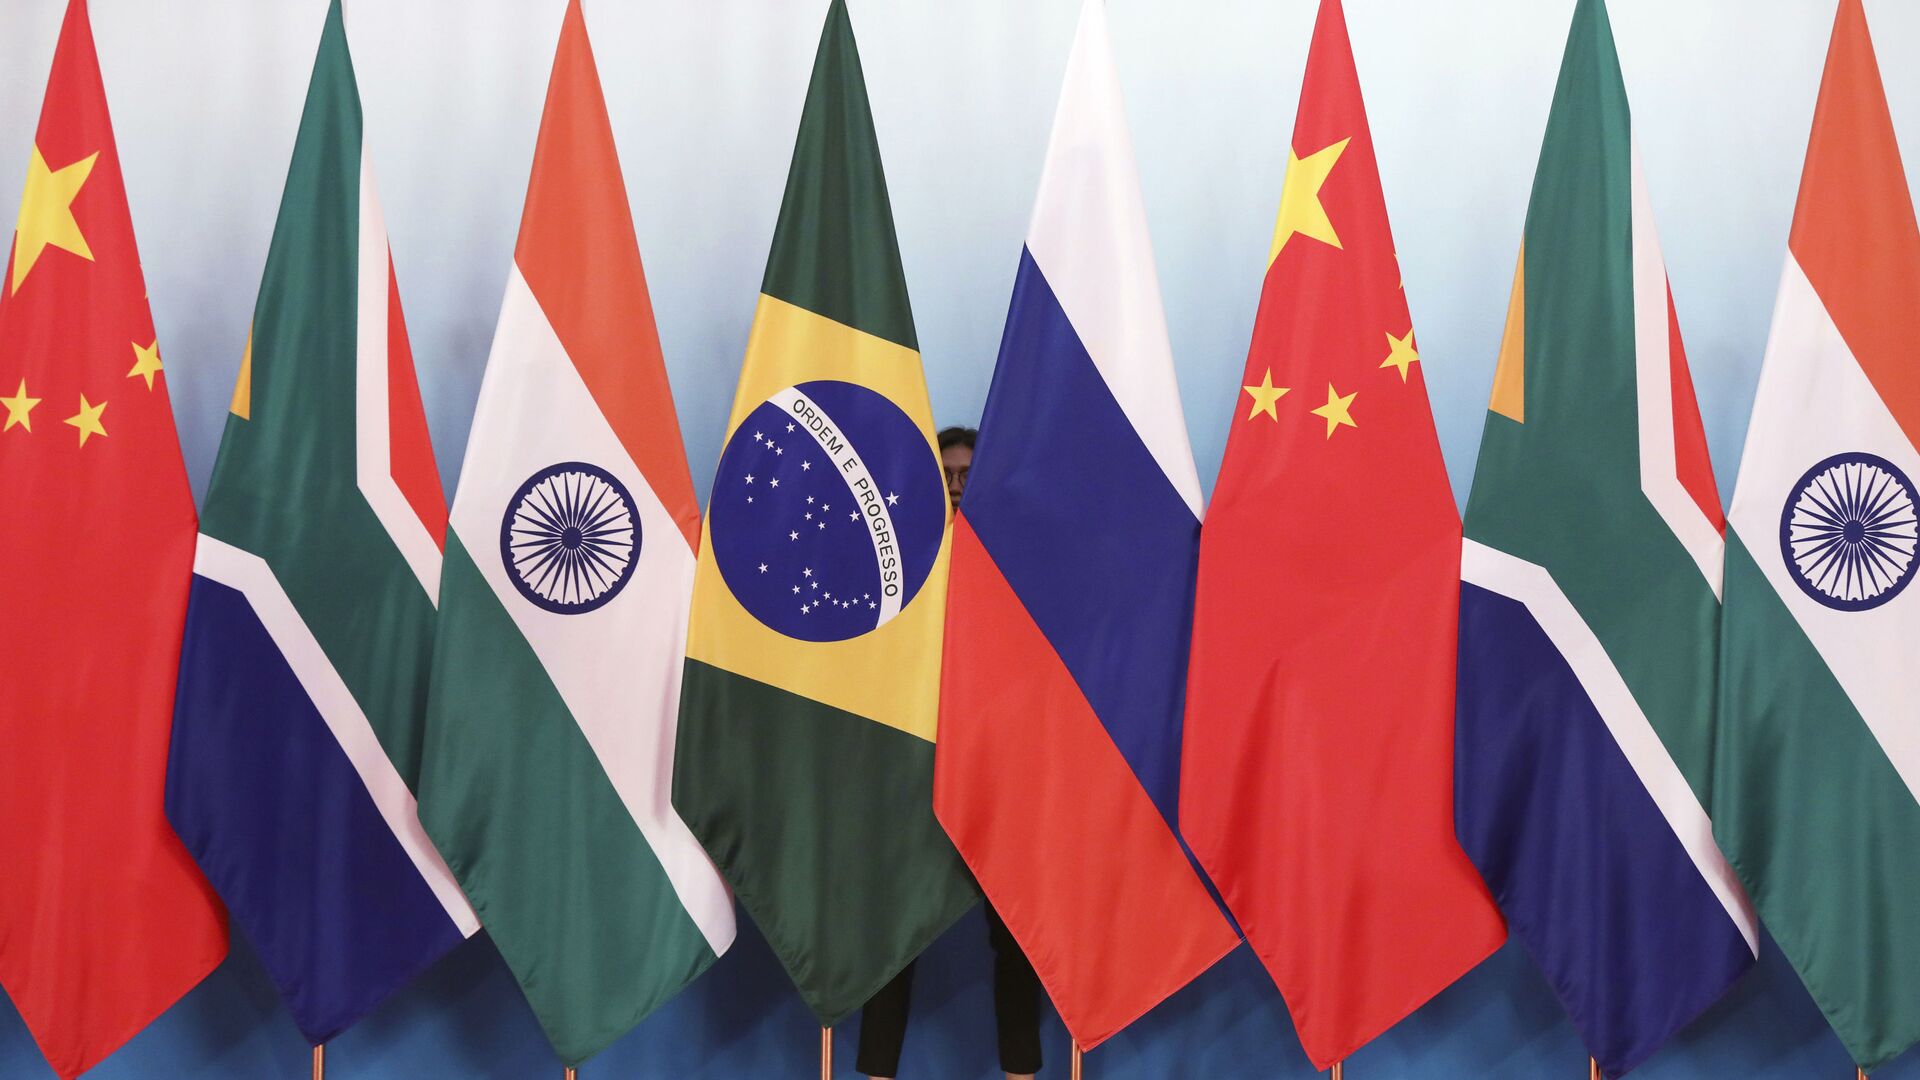 Staff worker stands behinds national flags of Brazil, Russia, China, South Africa and India to tidy the flags ahead of a group photo during the BRICS Summit at the Xiamen International Conference and Exhibition Center in Xiamen, southeastern China's Fujian Province, Monday, Sept. 4, 2017. - Sputnik International, 1920, 20.05.2022